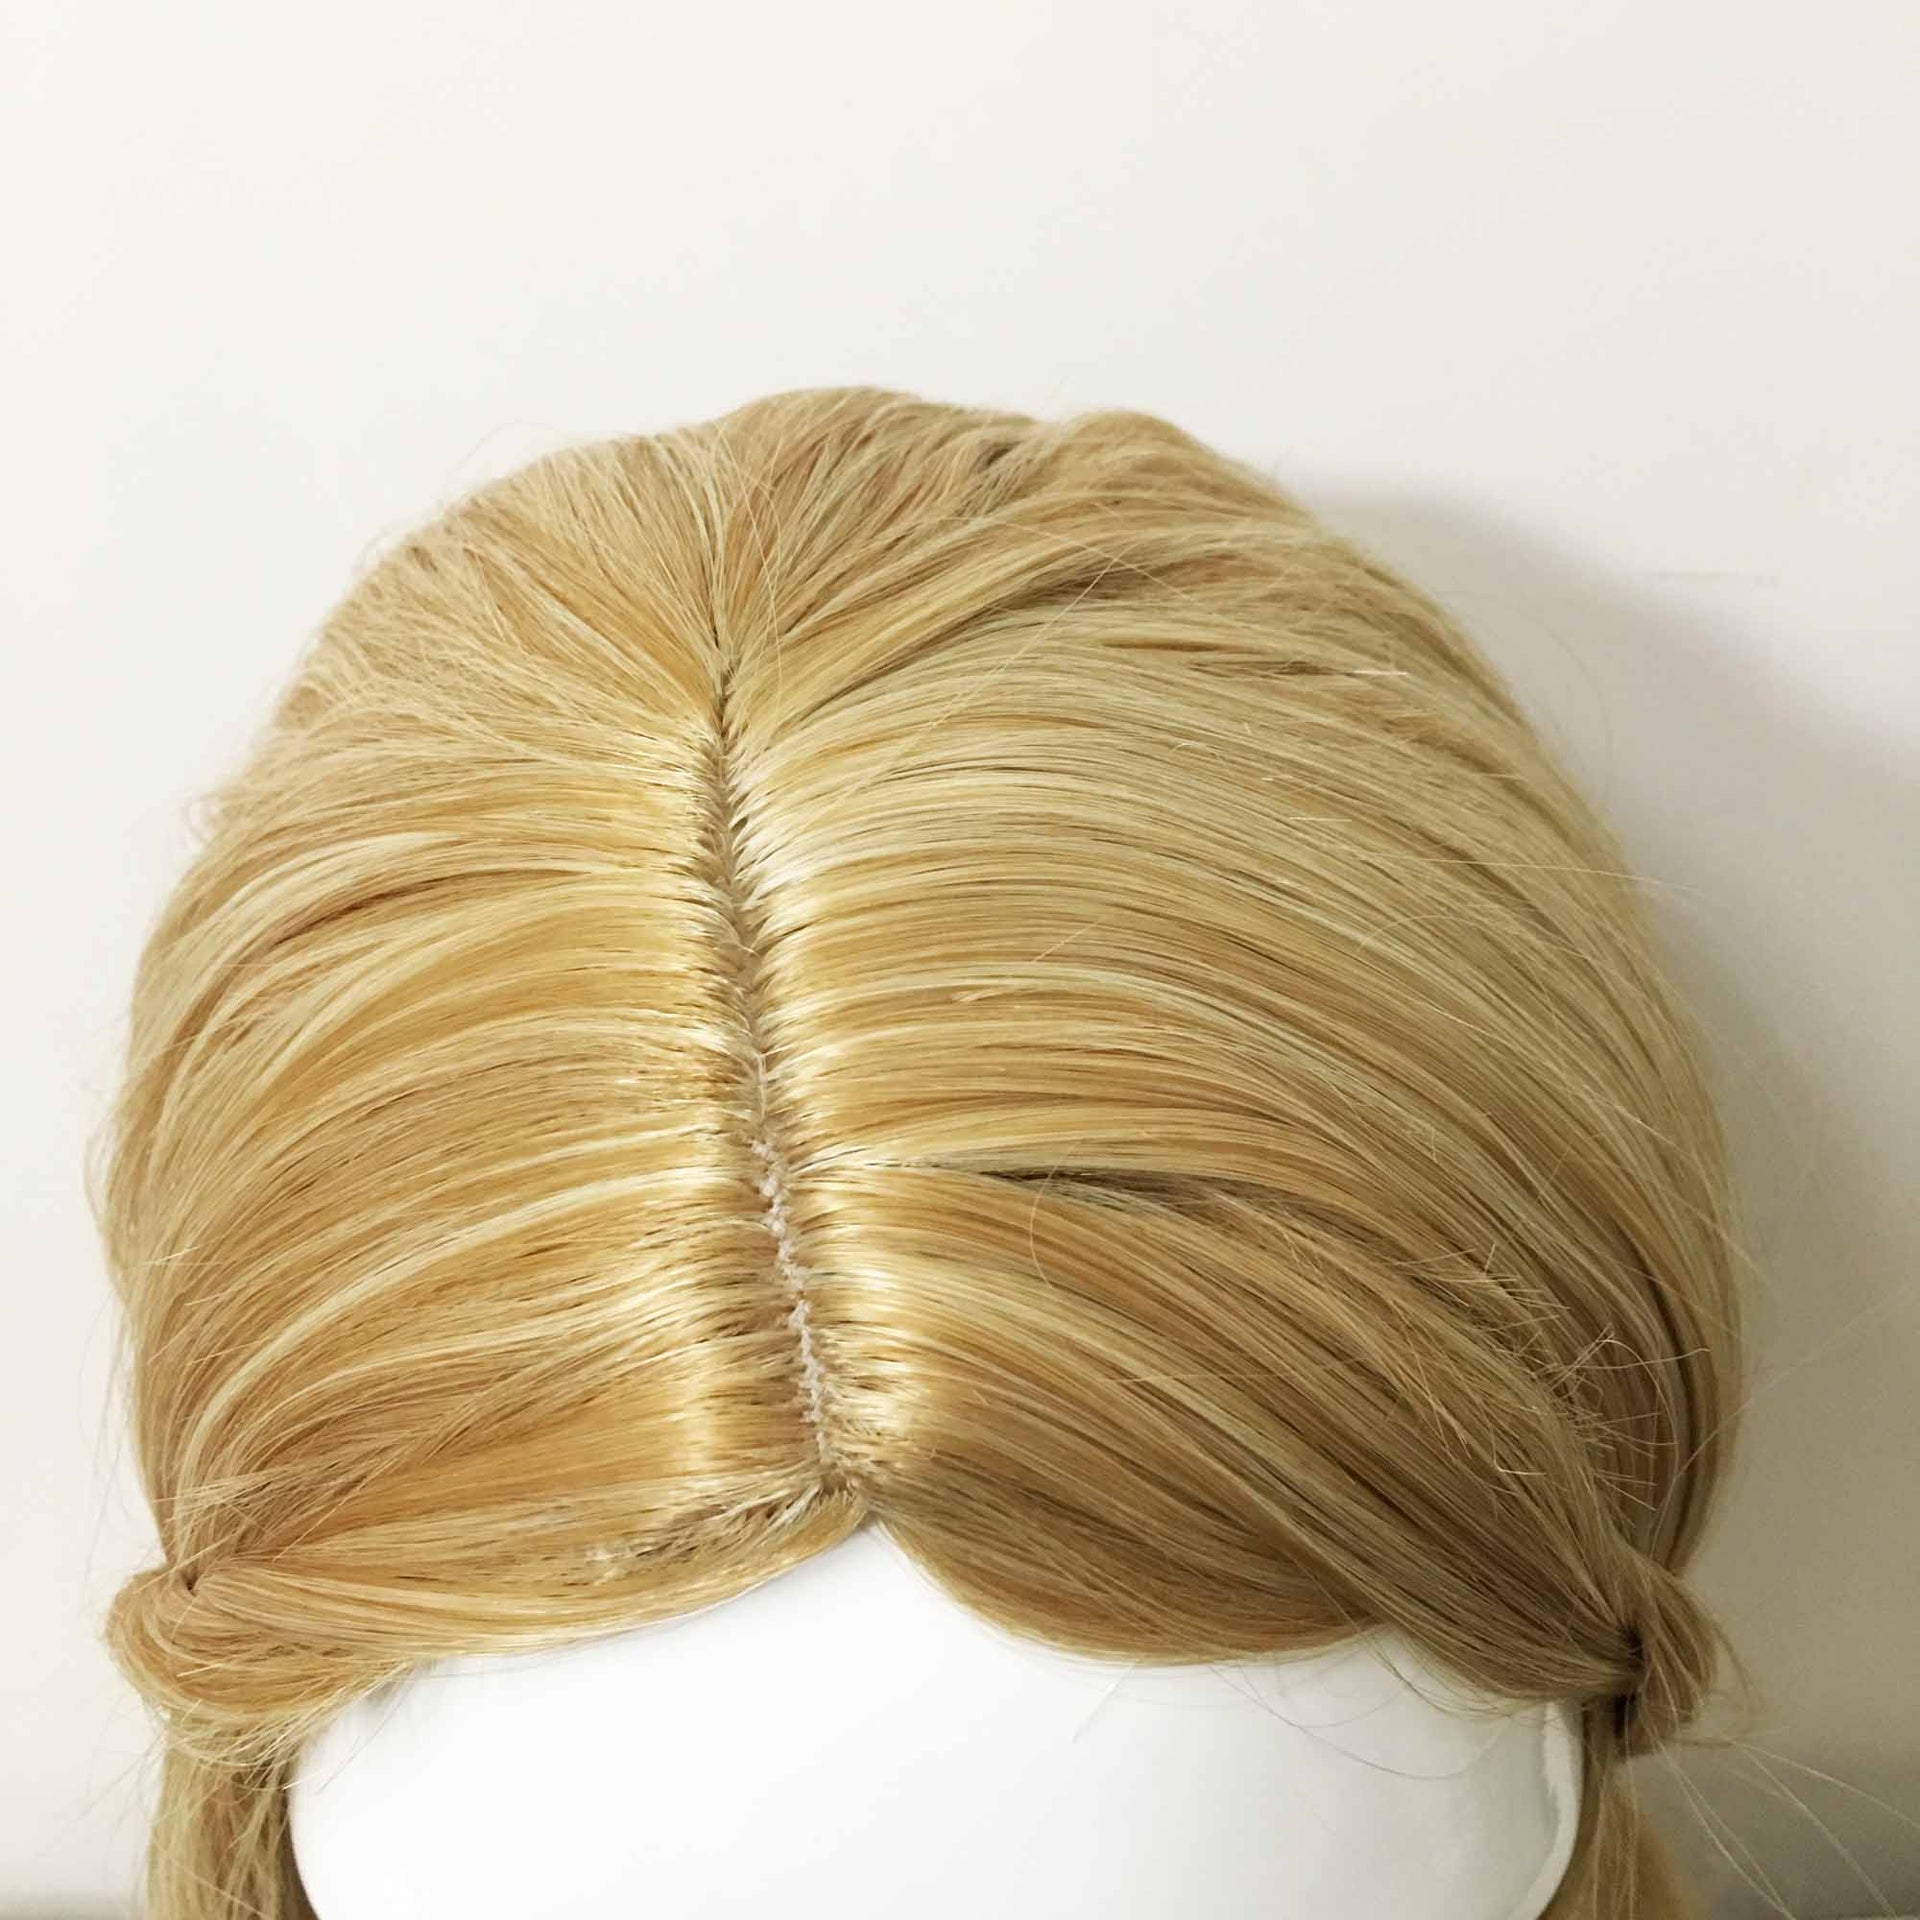 nevermindyrhead Women Blonde Long Curly Princess Style Braided Middle Part Wig